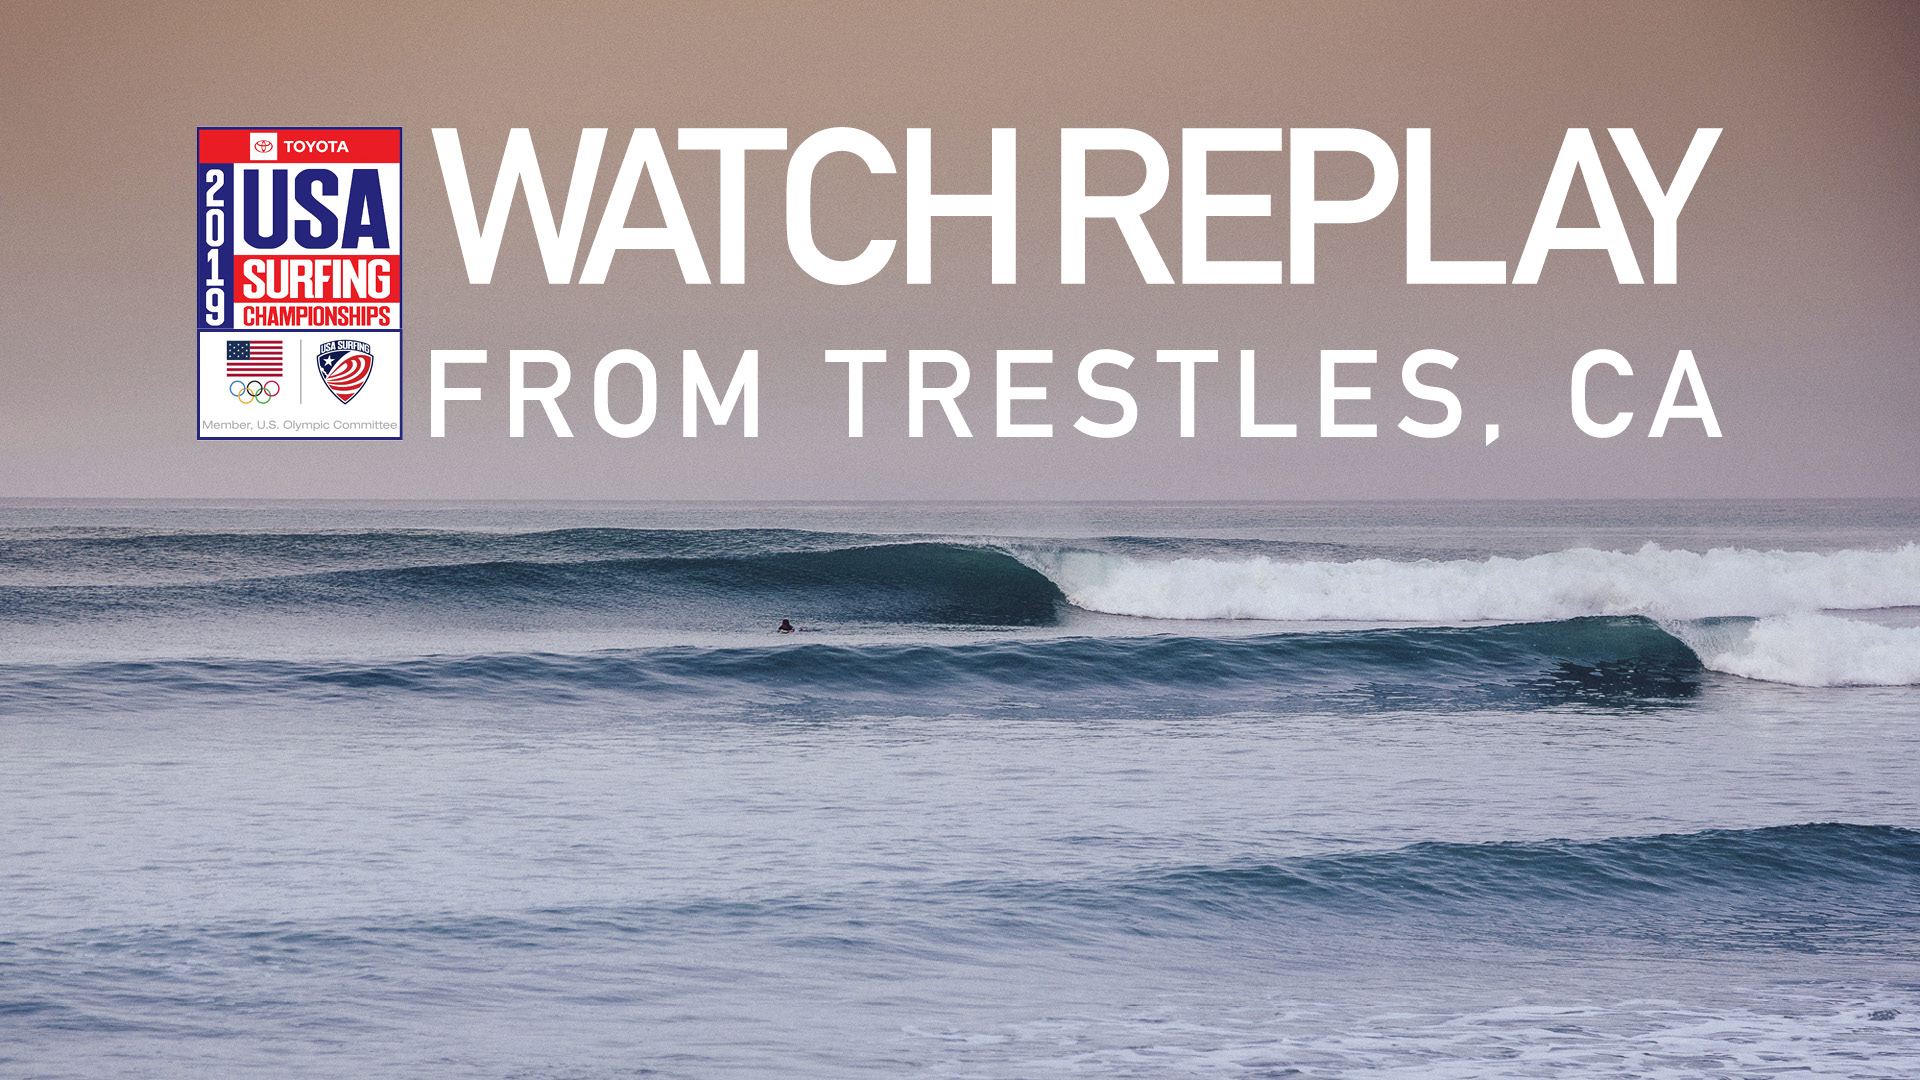 2019 Toyota Usa Surfing Championships Replay - Freedom In Christ , HD Wallpaper & Backgrounds